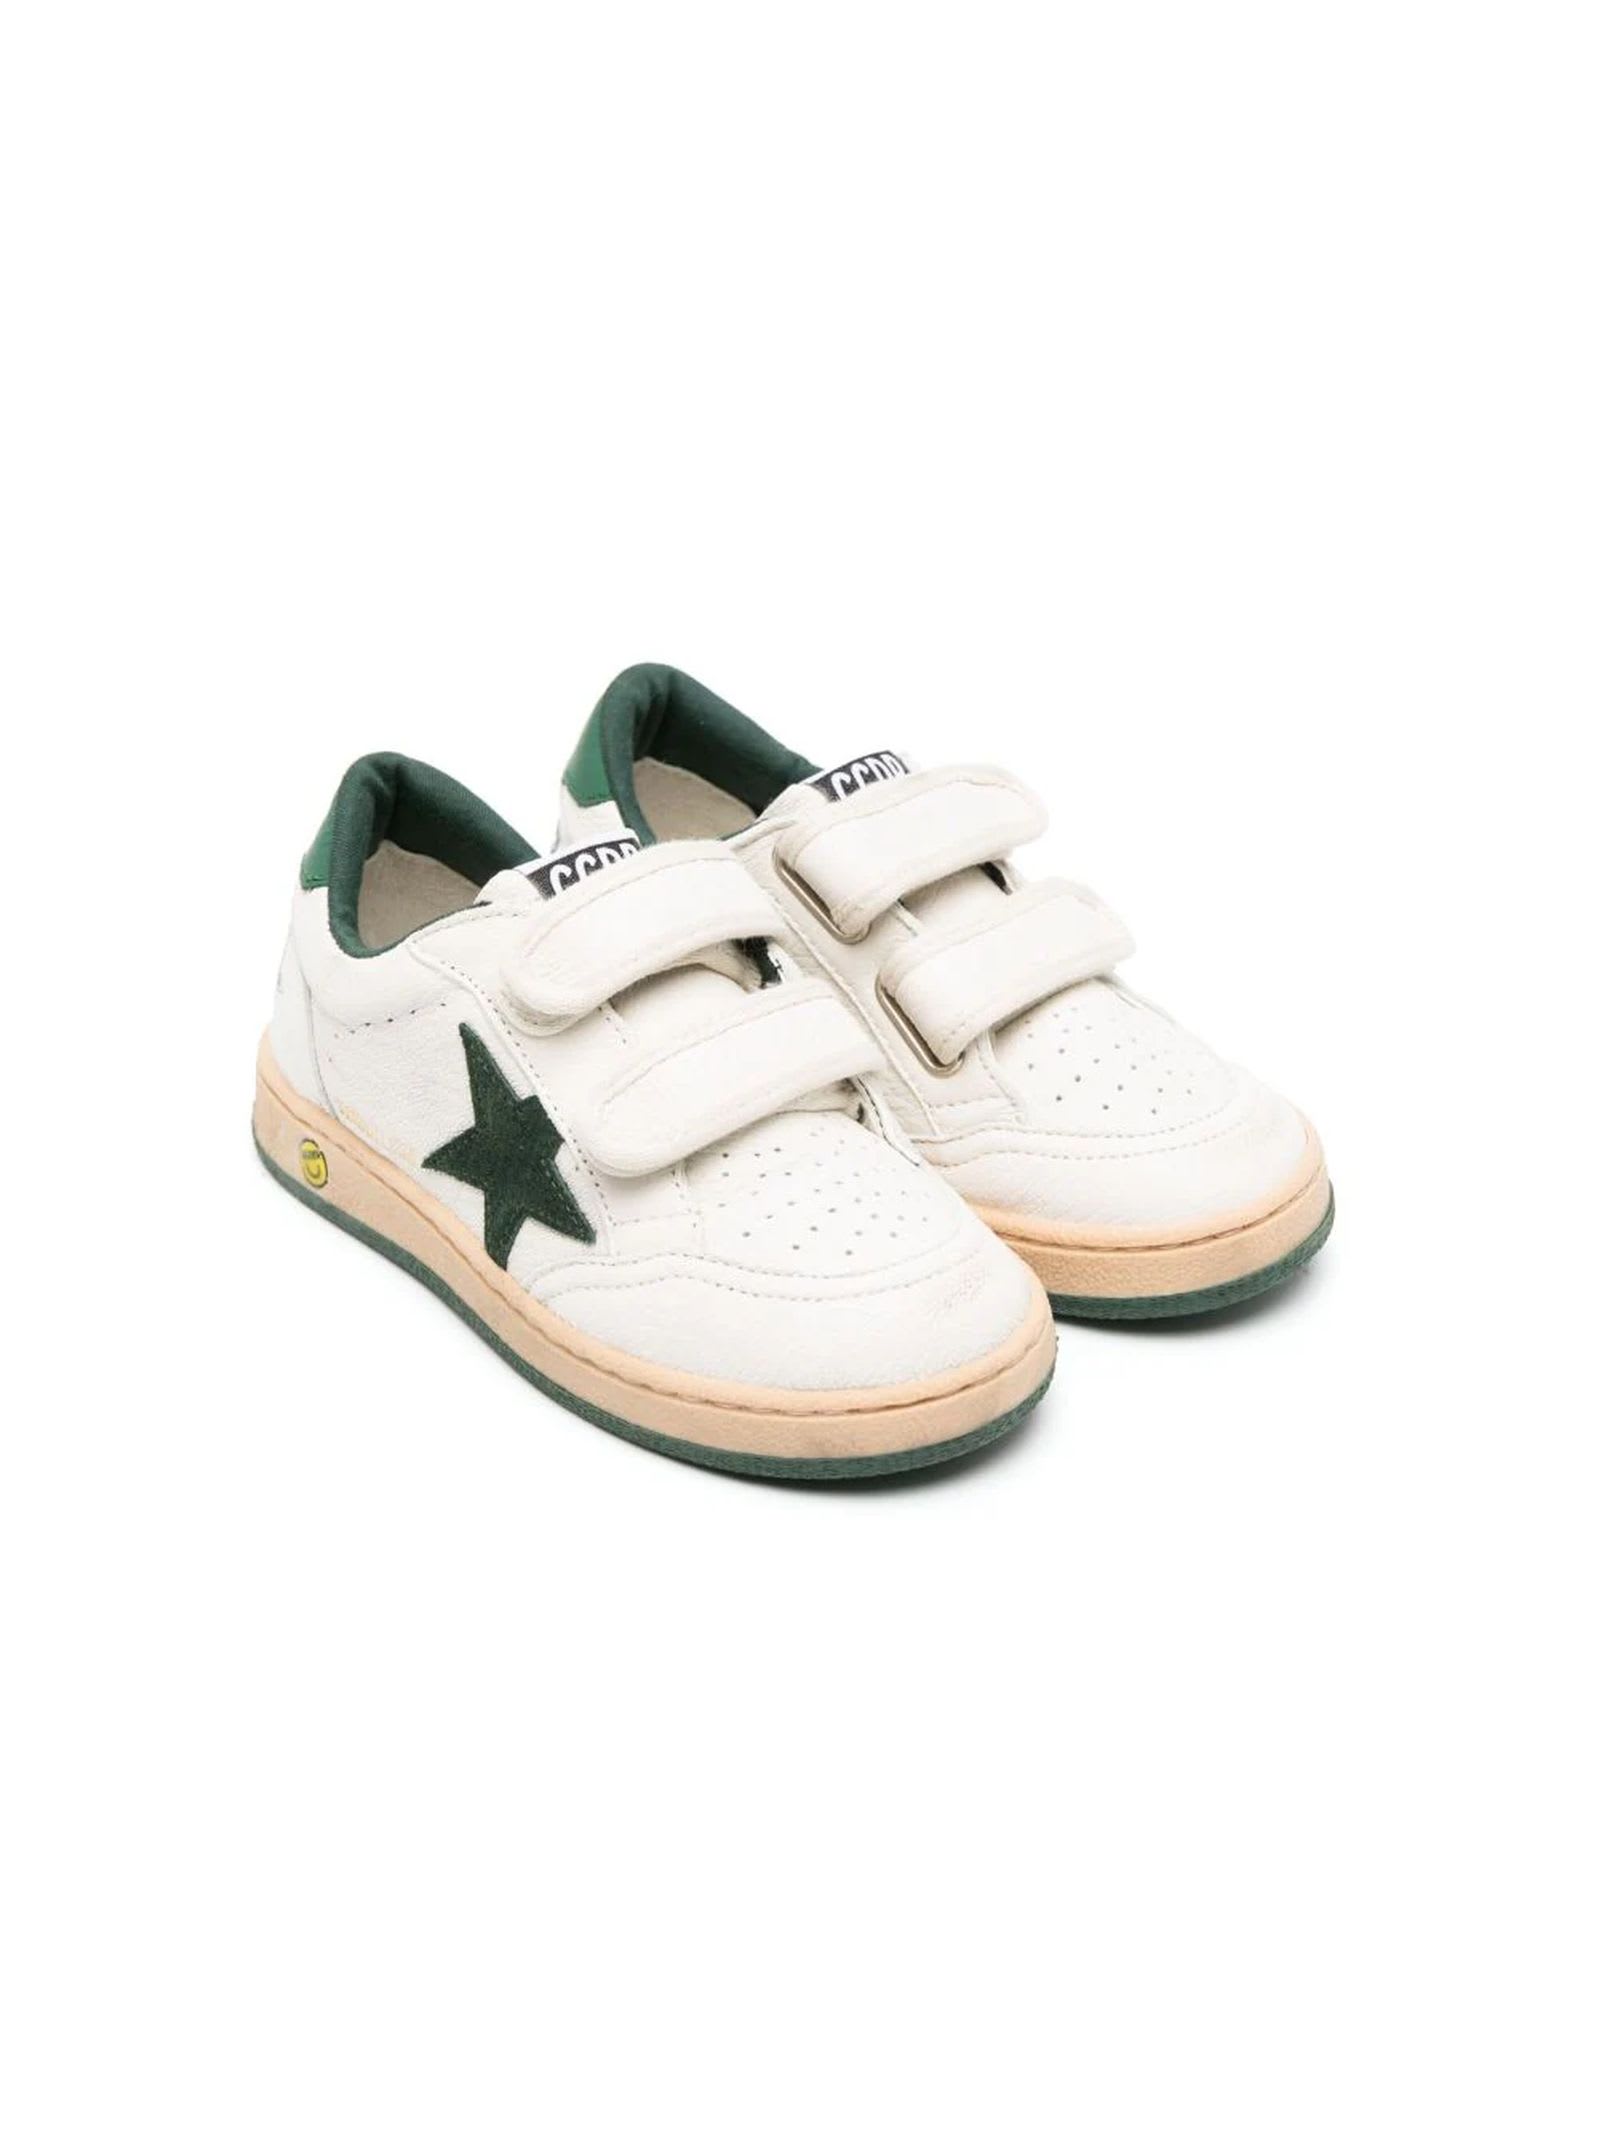 Golden Goose Ivory White Calf Leather Sneakers